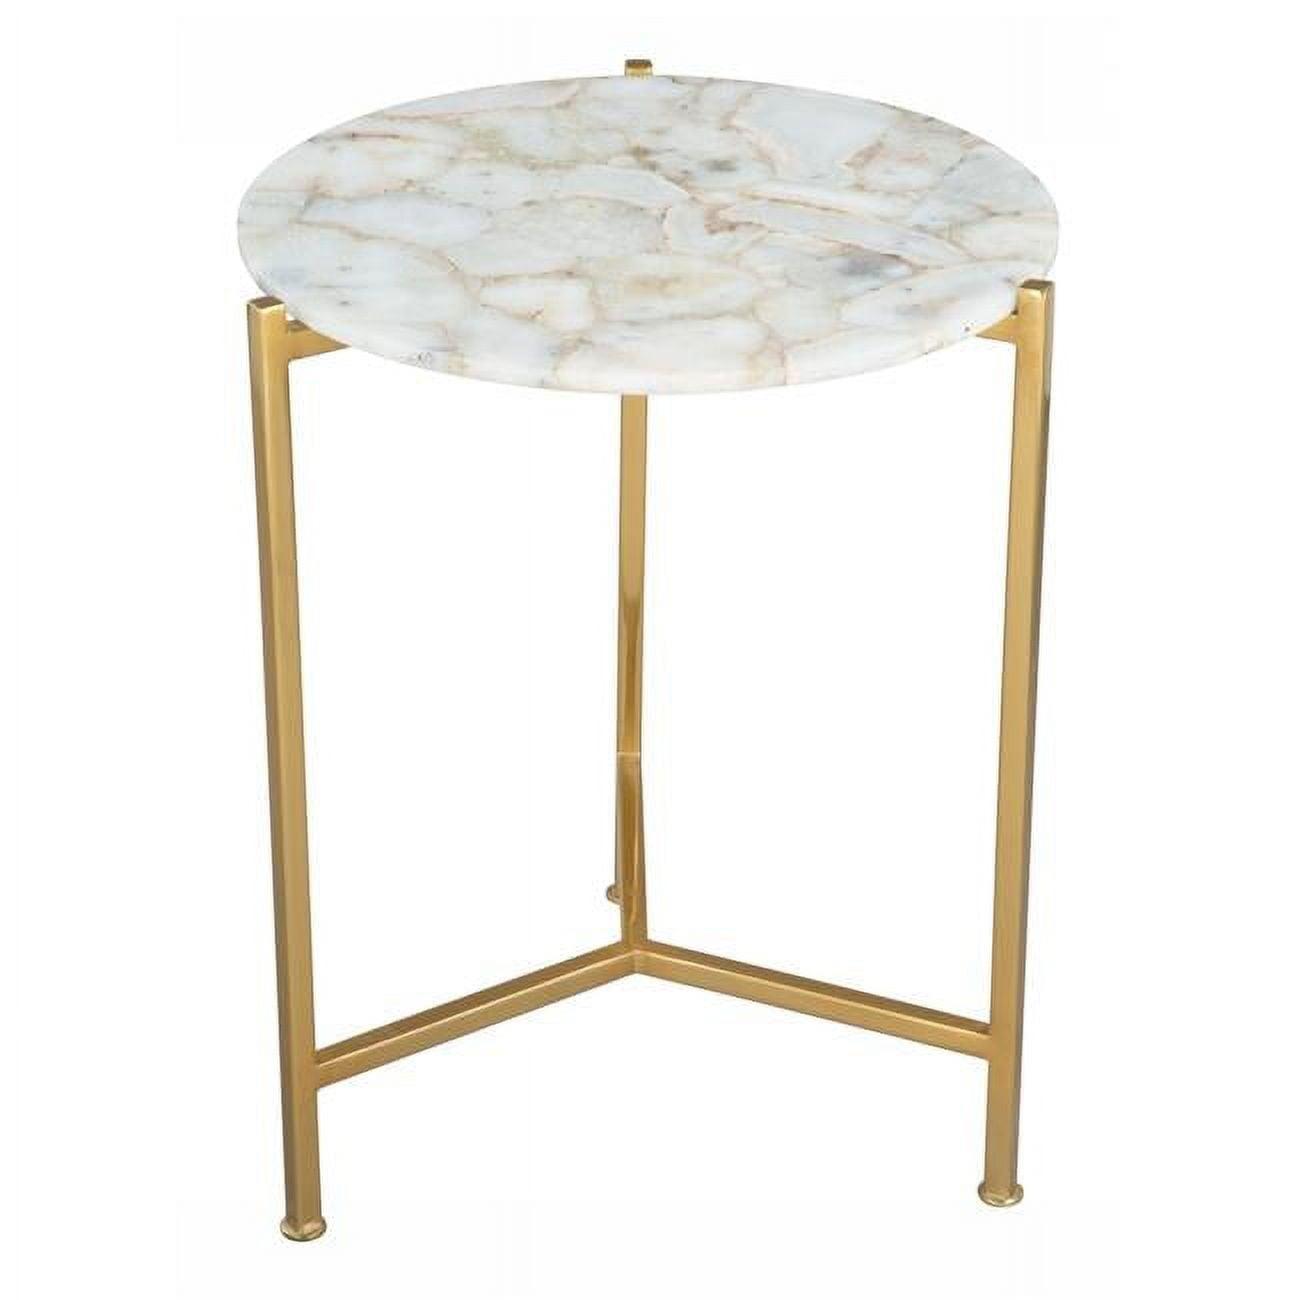 Haru Round Agate Stone Top White & Gold Side Table